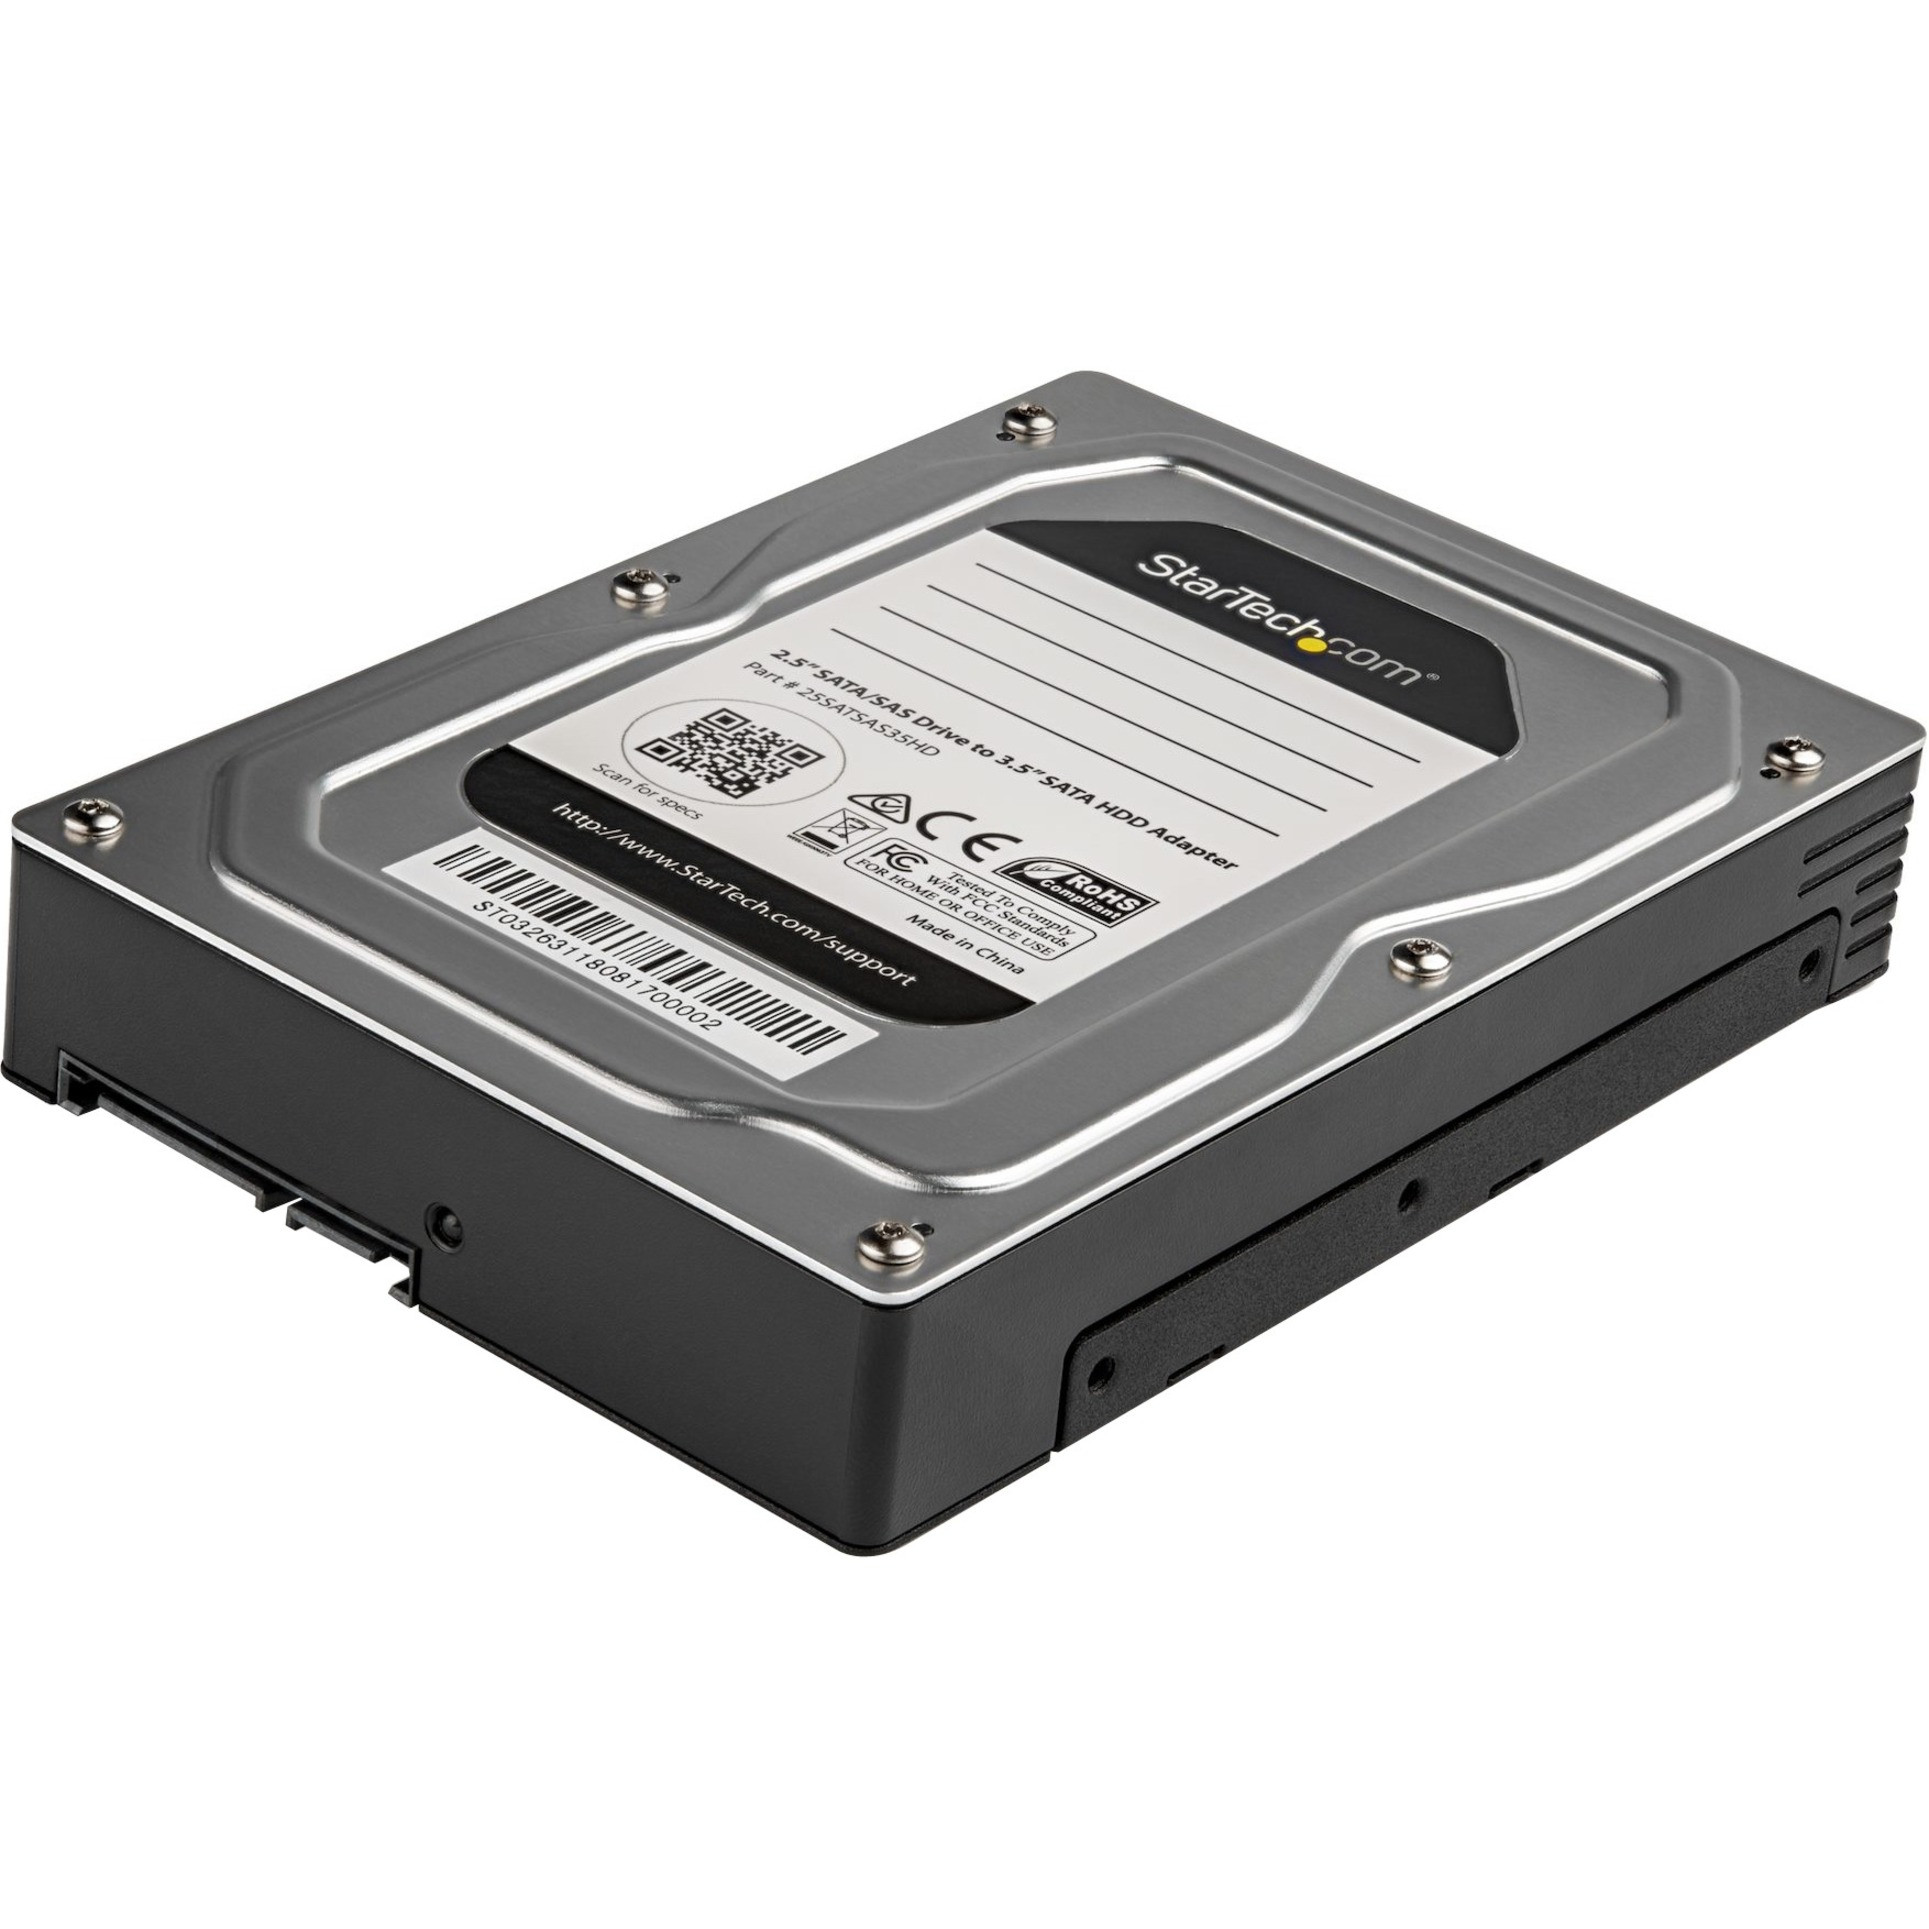 Startech .com 2.5 to 3.5 Hard Drive AdapterFor SATA and SAS SSD / HDD2.5 to  3.5 Hard Drive Enclosure2.5 to 3.5 SSD Adapter2.5 to 25SATSAS35HD -  Corporate Armor